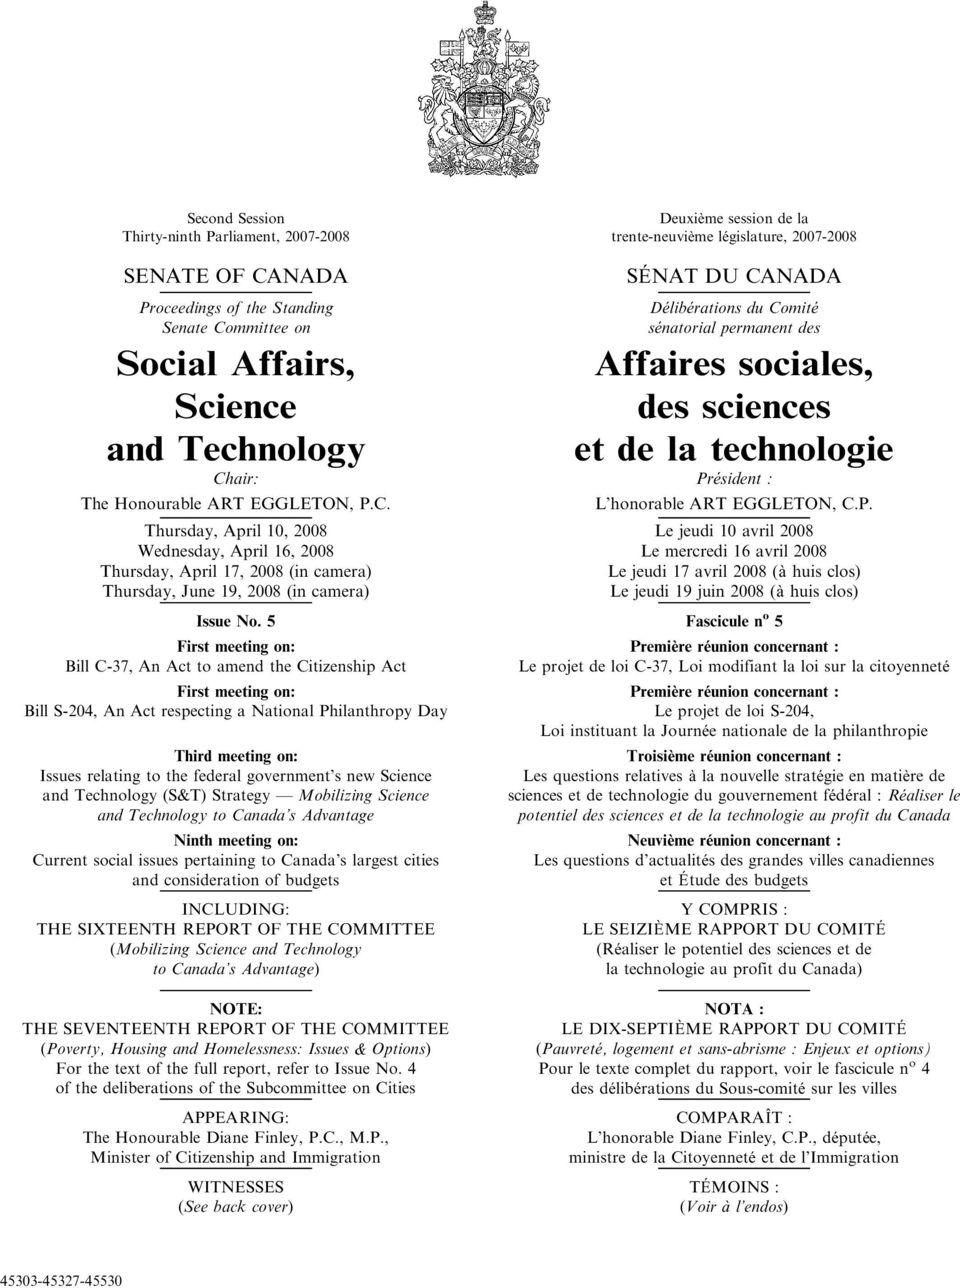 government s new Science and Technology (S&T) Strategy Mobilizing Science and Technology to Canada s Advantage Ninth meeting on: Current social issues pertaining to Canada s largest cities and